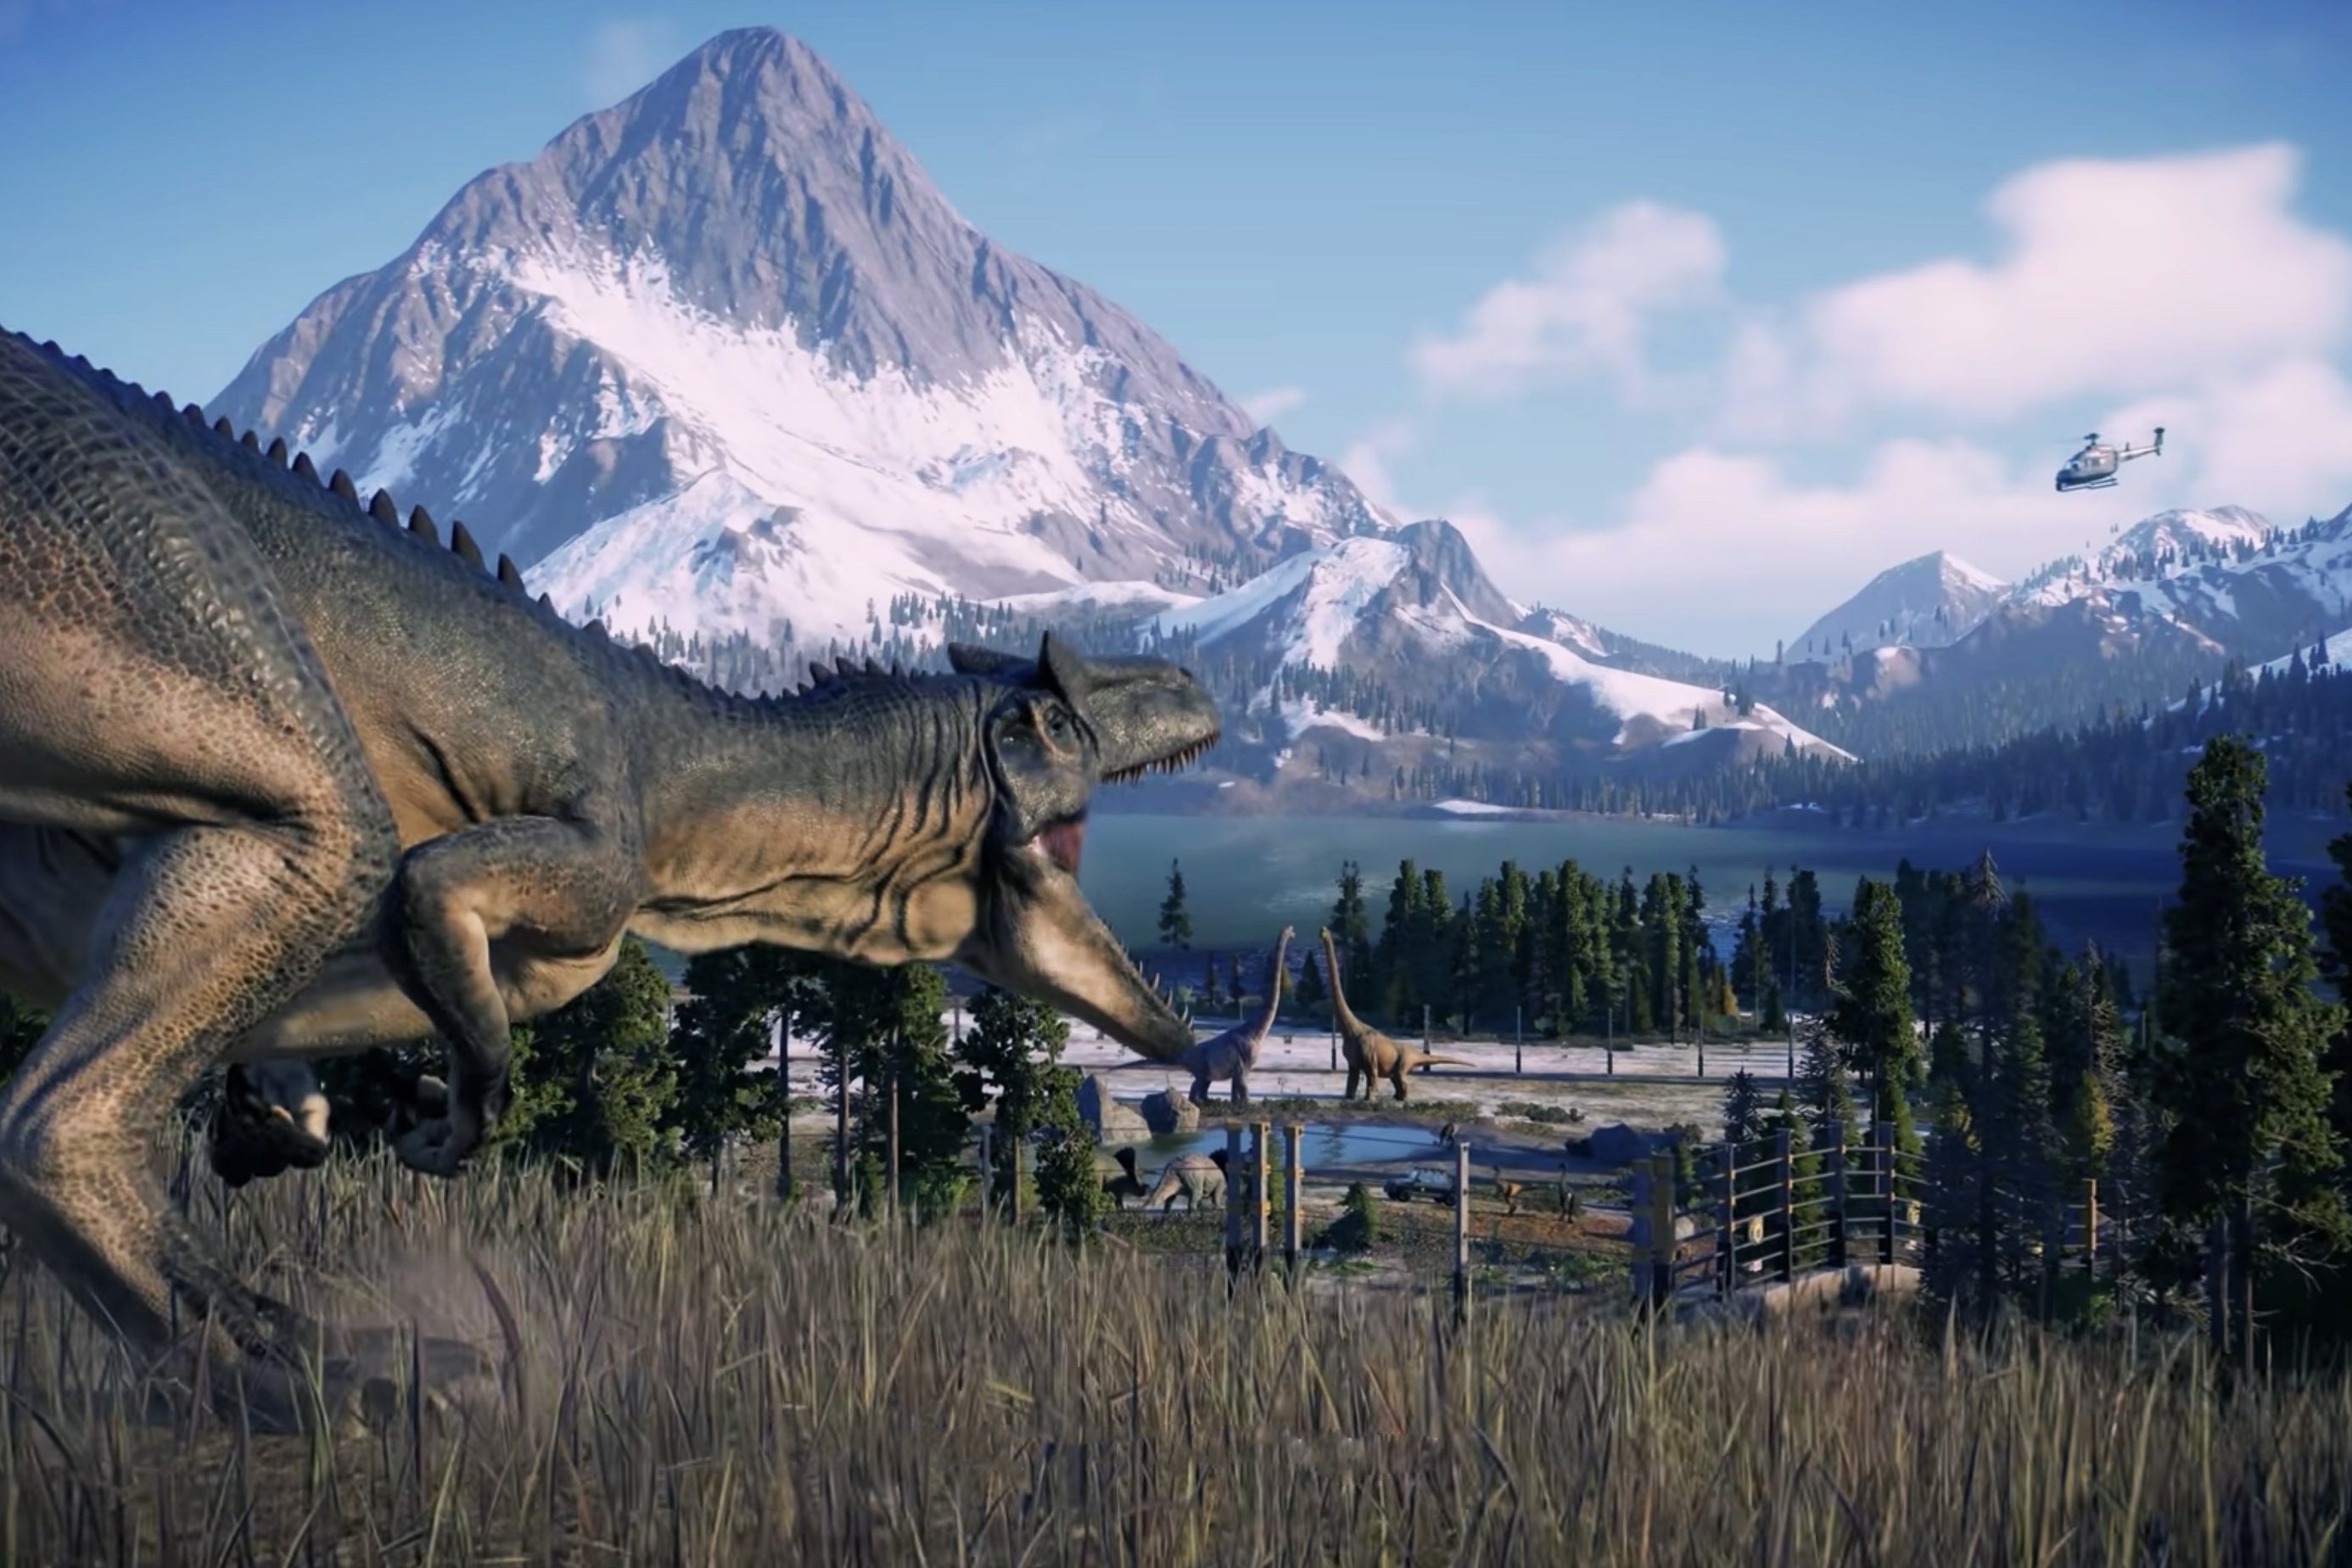 Jurassic Park Survival Release Window, Trailer, Gameplay, and More